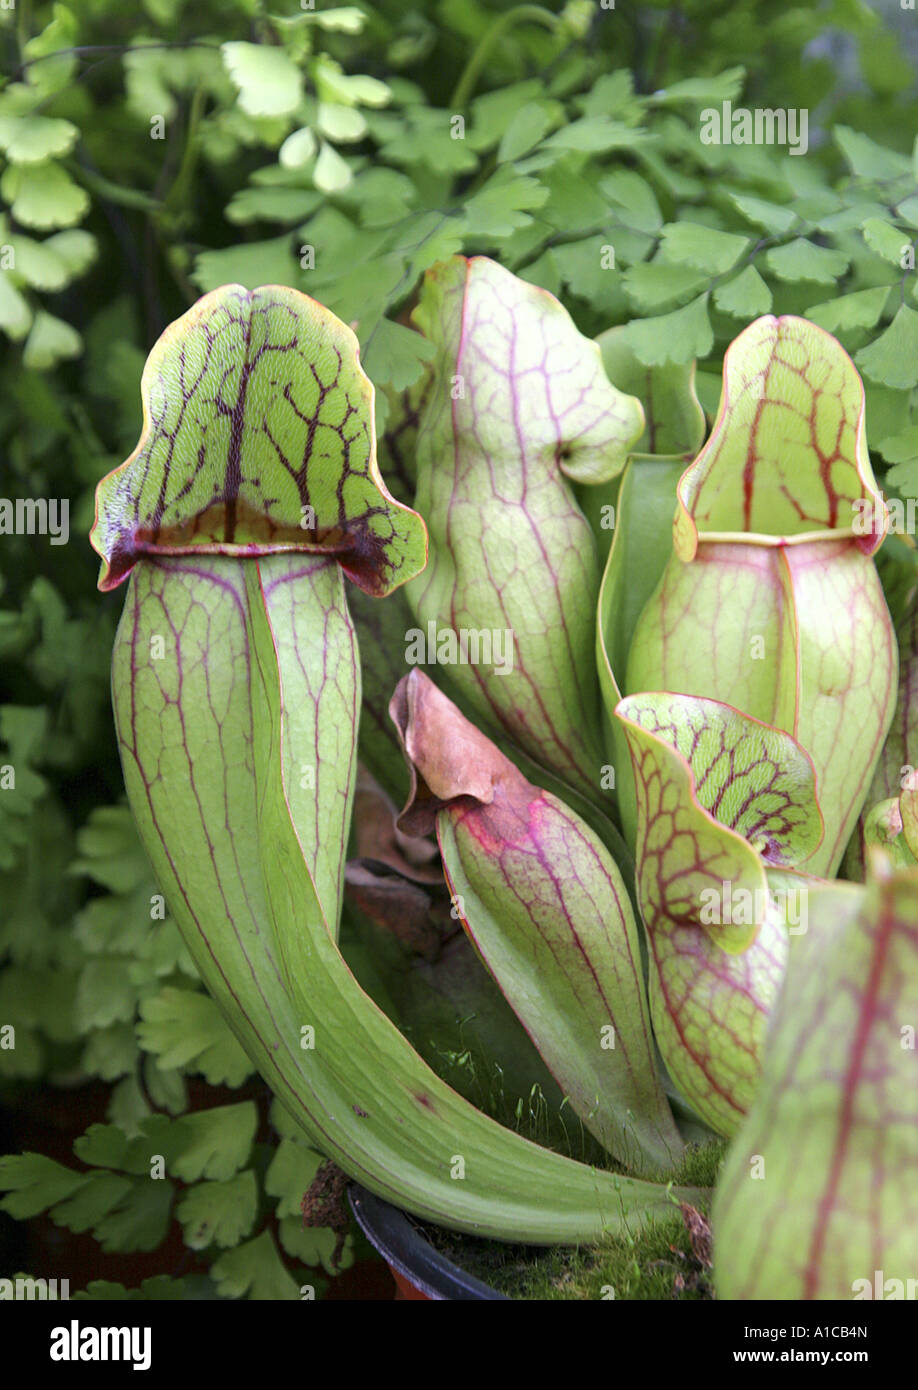 northern pitcher plant (Sarracenia purpurea), special leaves for catching insects Stock Photo